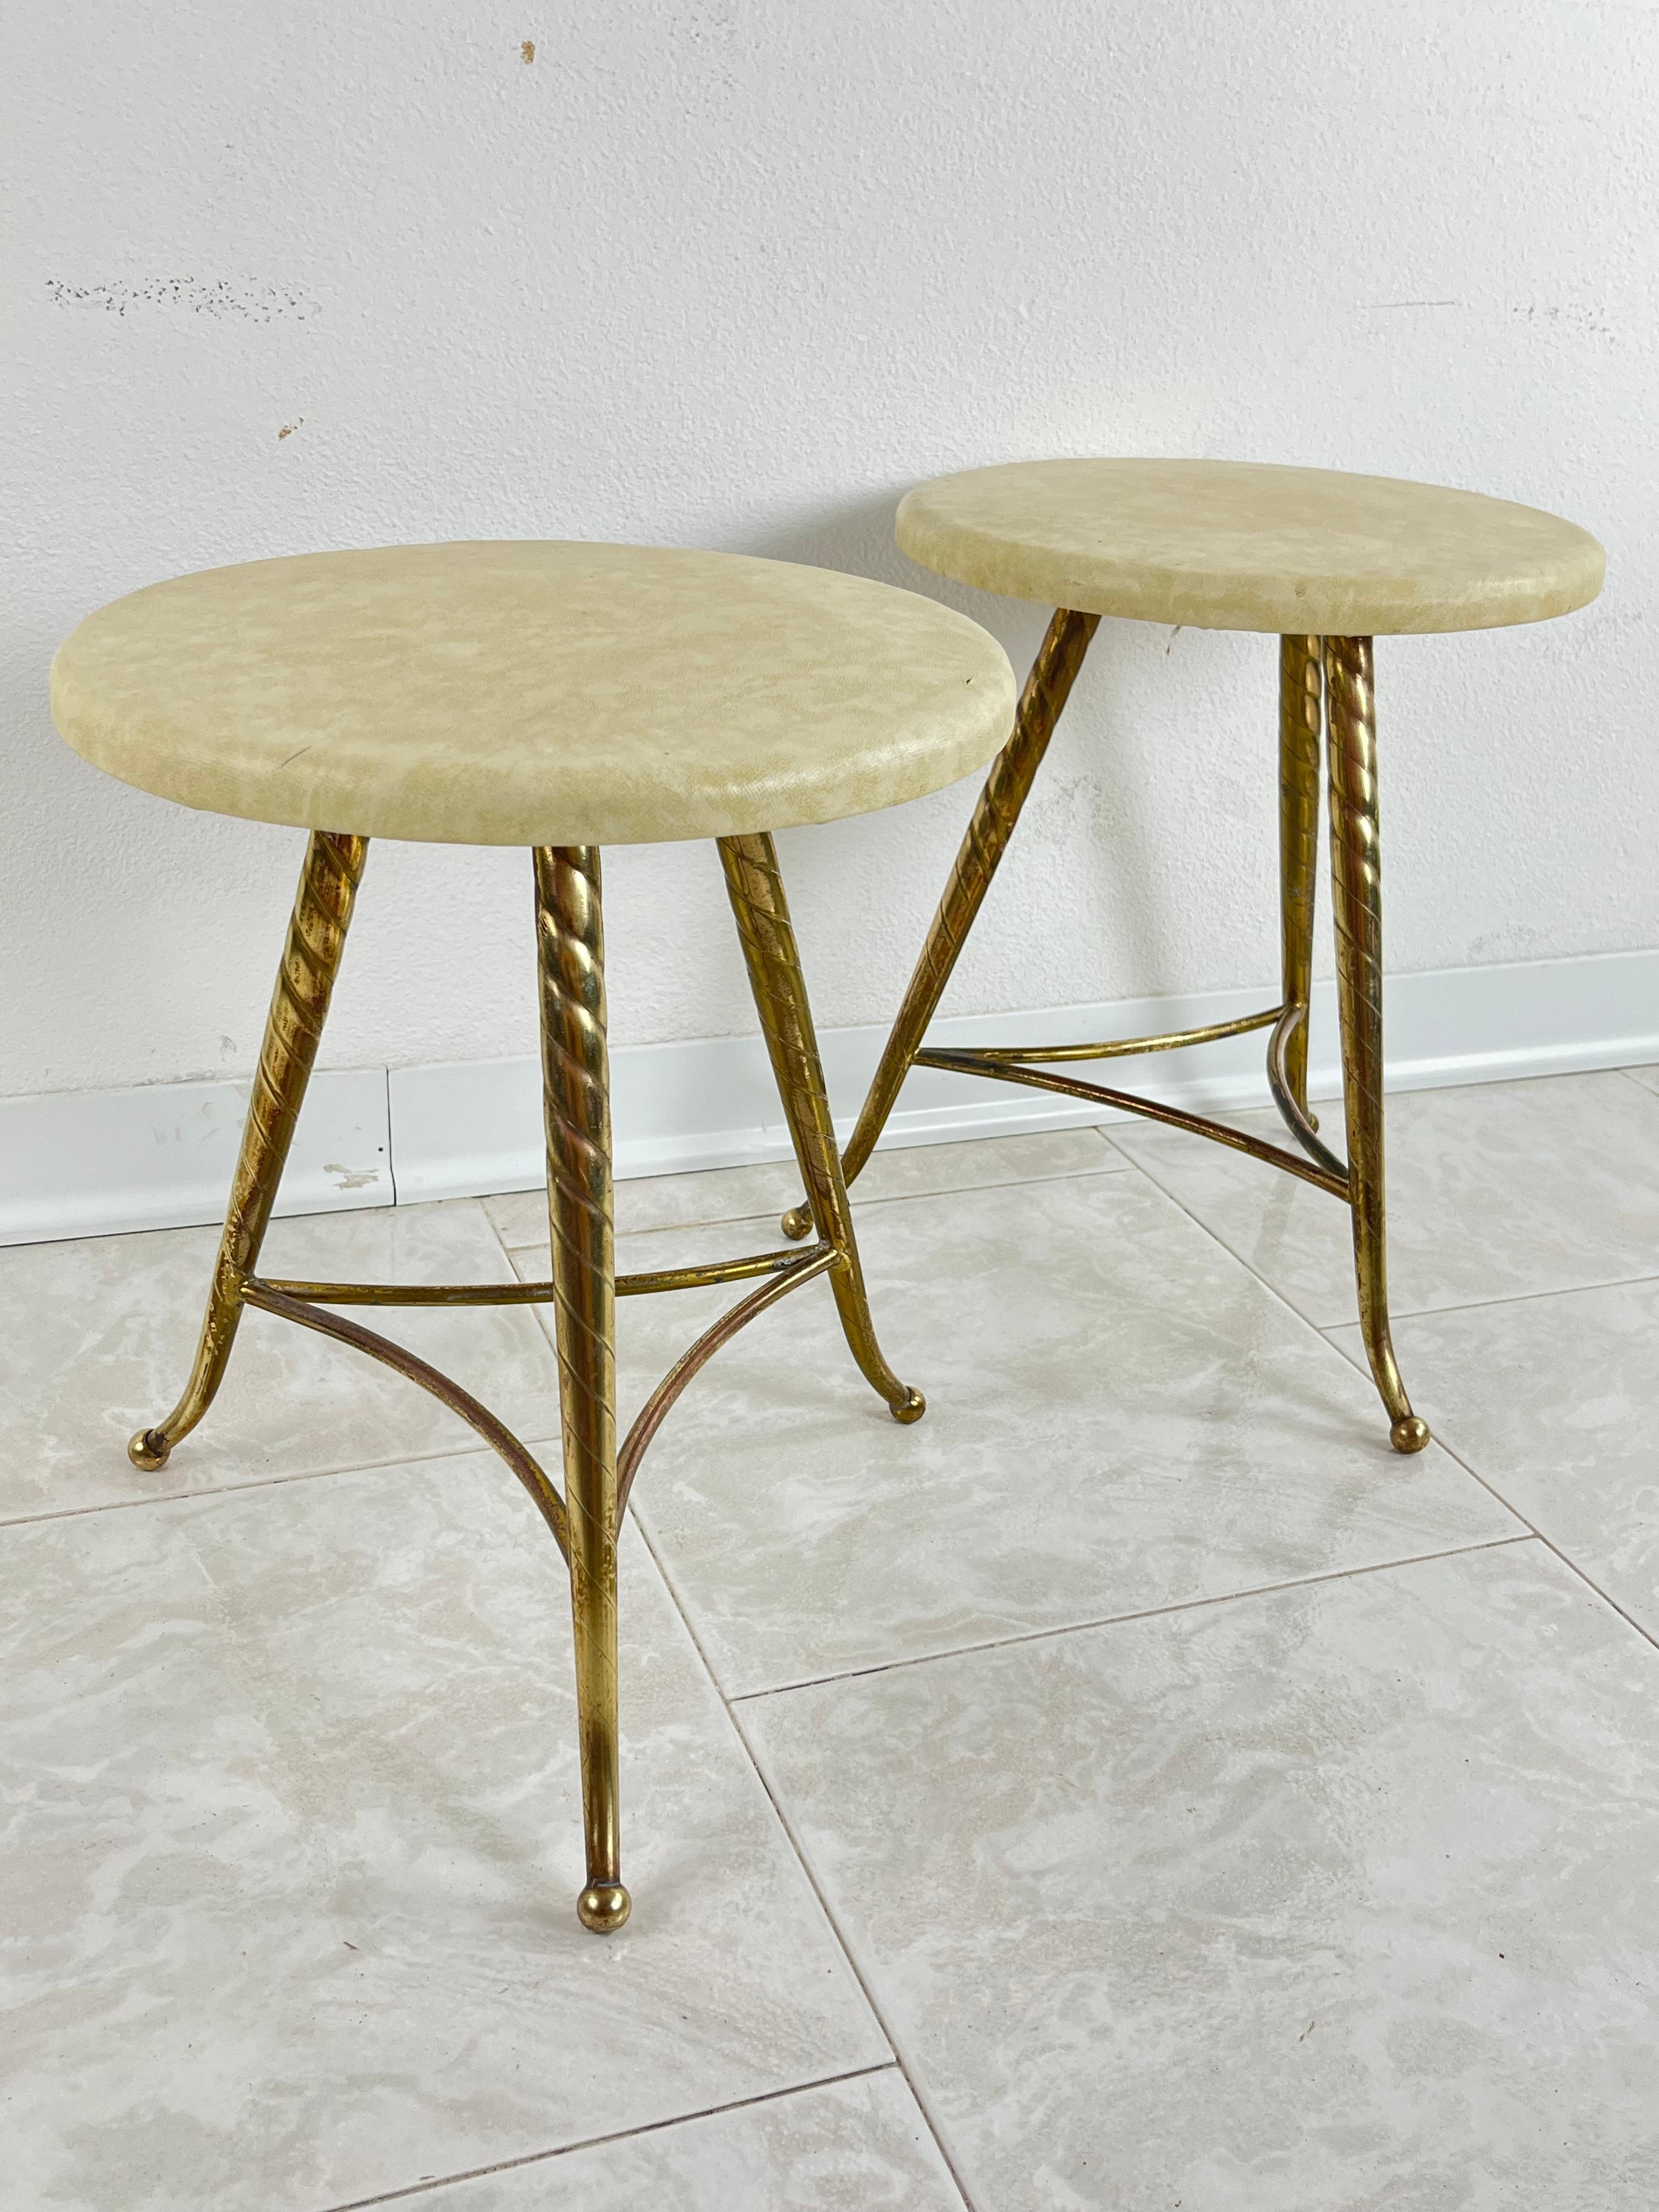 Set of 2 Mid-Century Brass Stools Attributed to Paolo Buffa 1950s For Sale 4